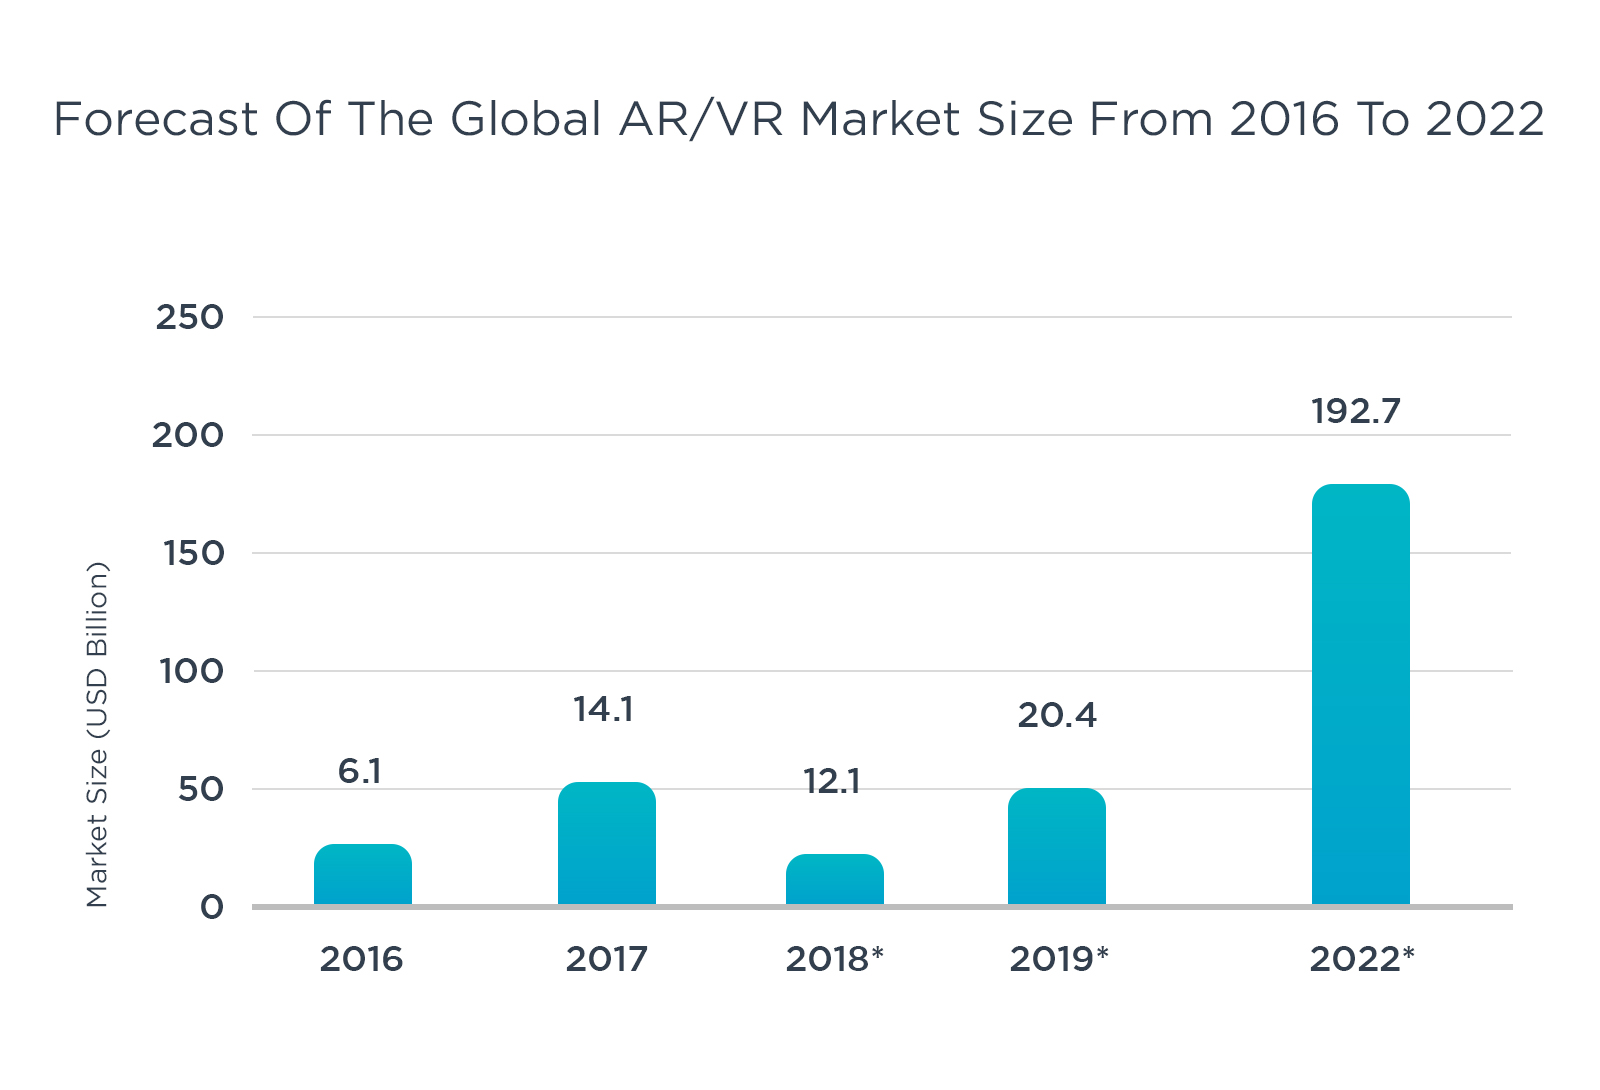 Forecast of the Global AR/VR Market Size from 2016 to 2022